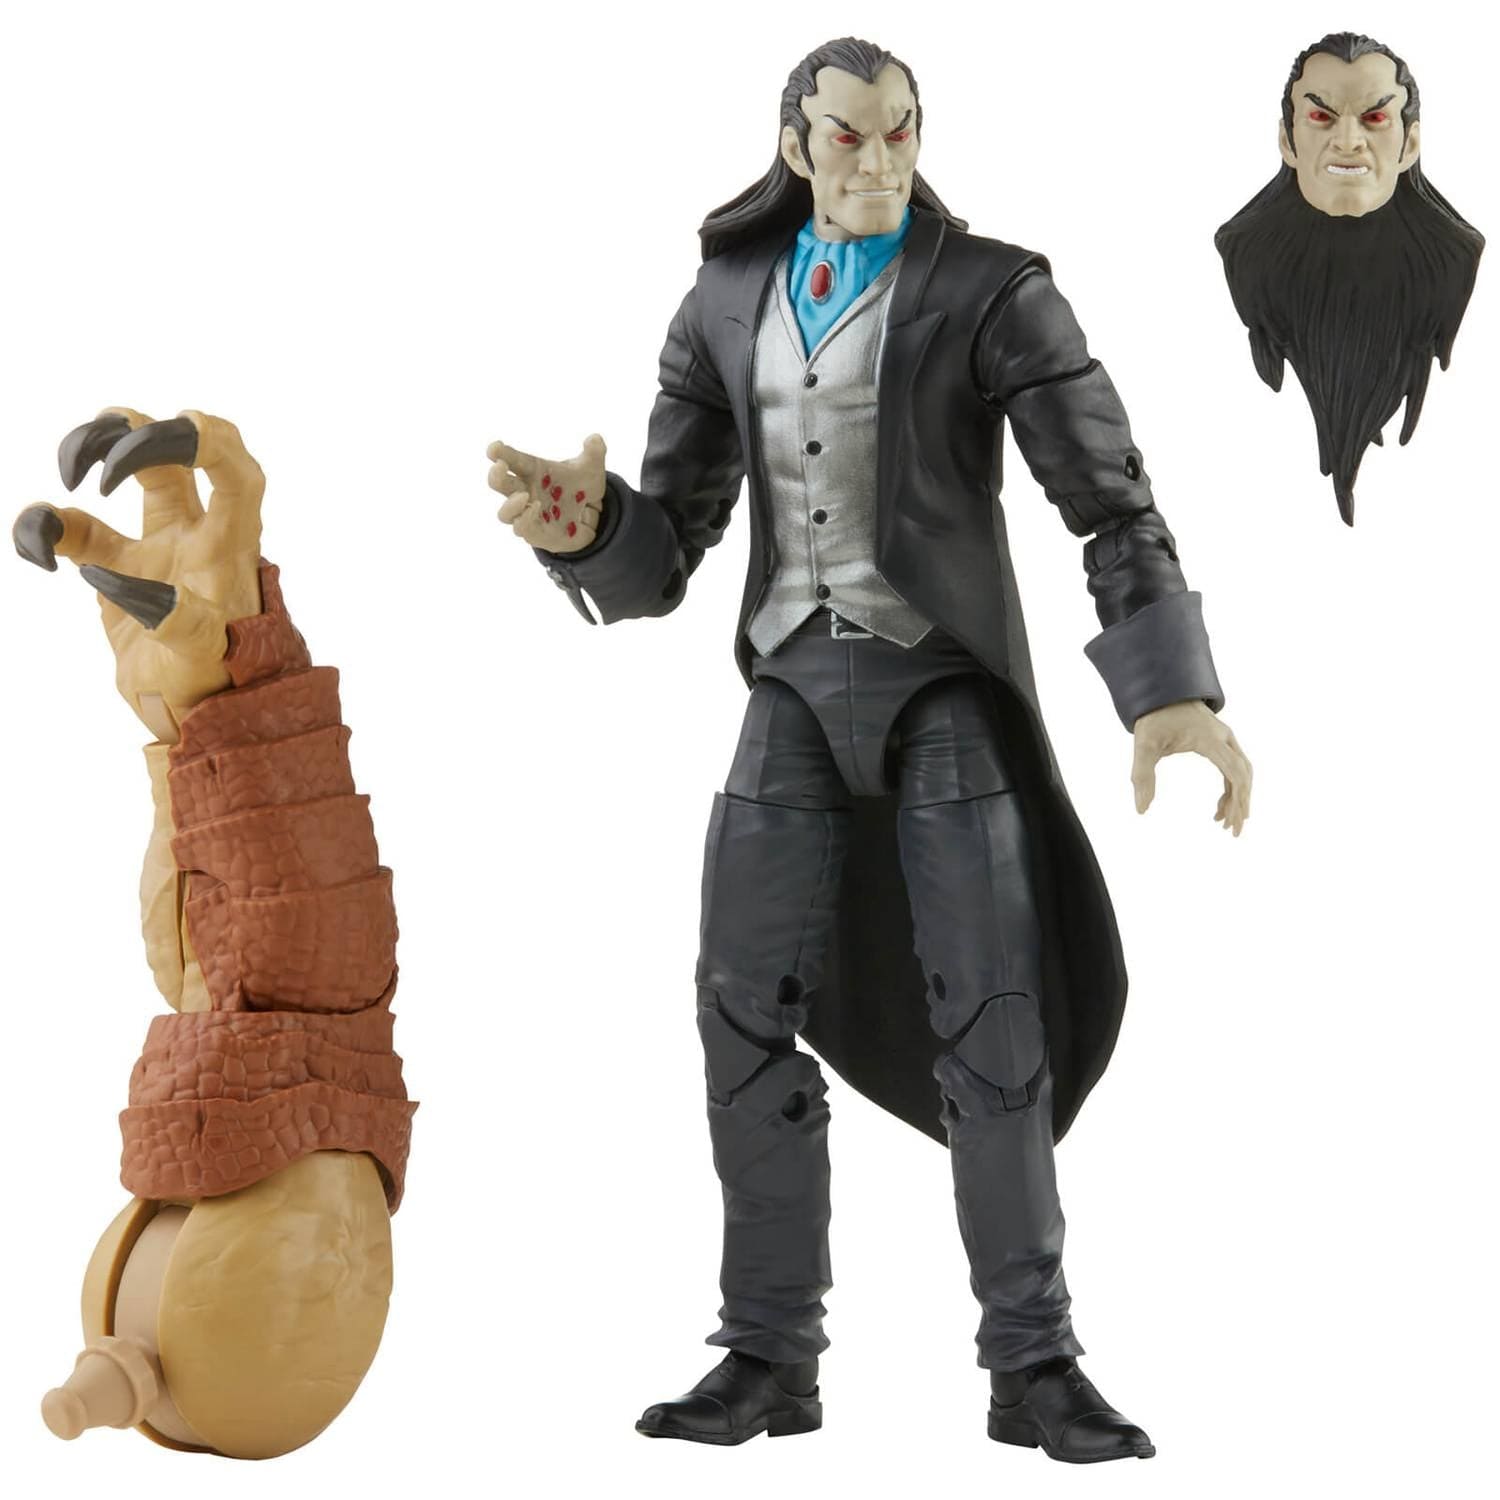 Hasbro Marvel Legends Series Morlun 6 Inch Action Figure and Build-A-Figure PartS